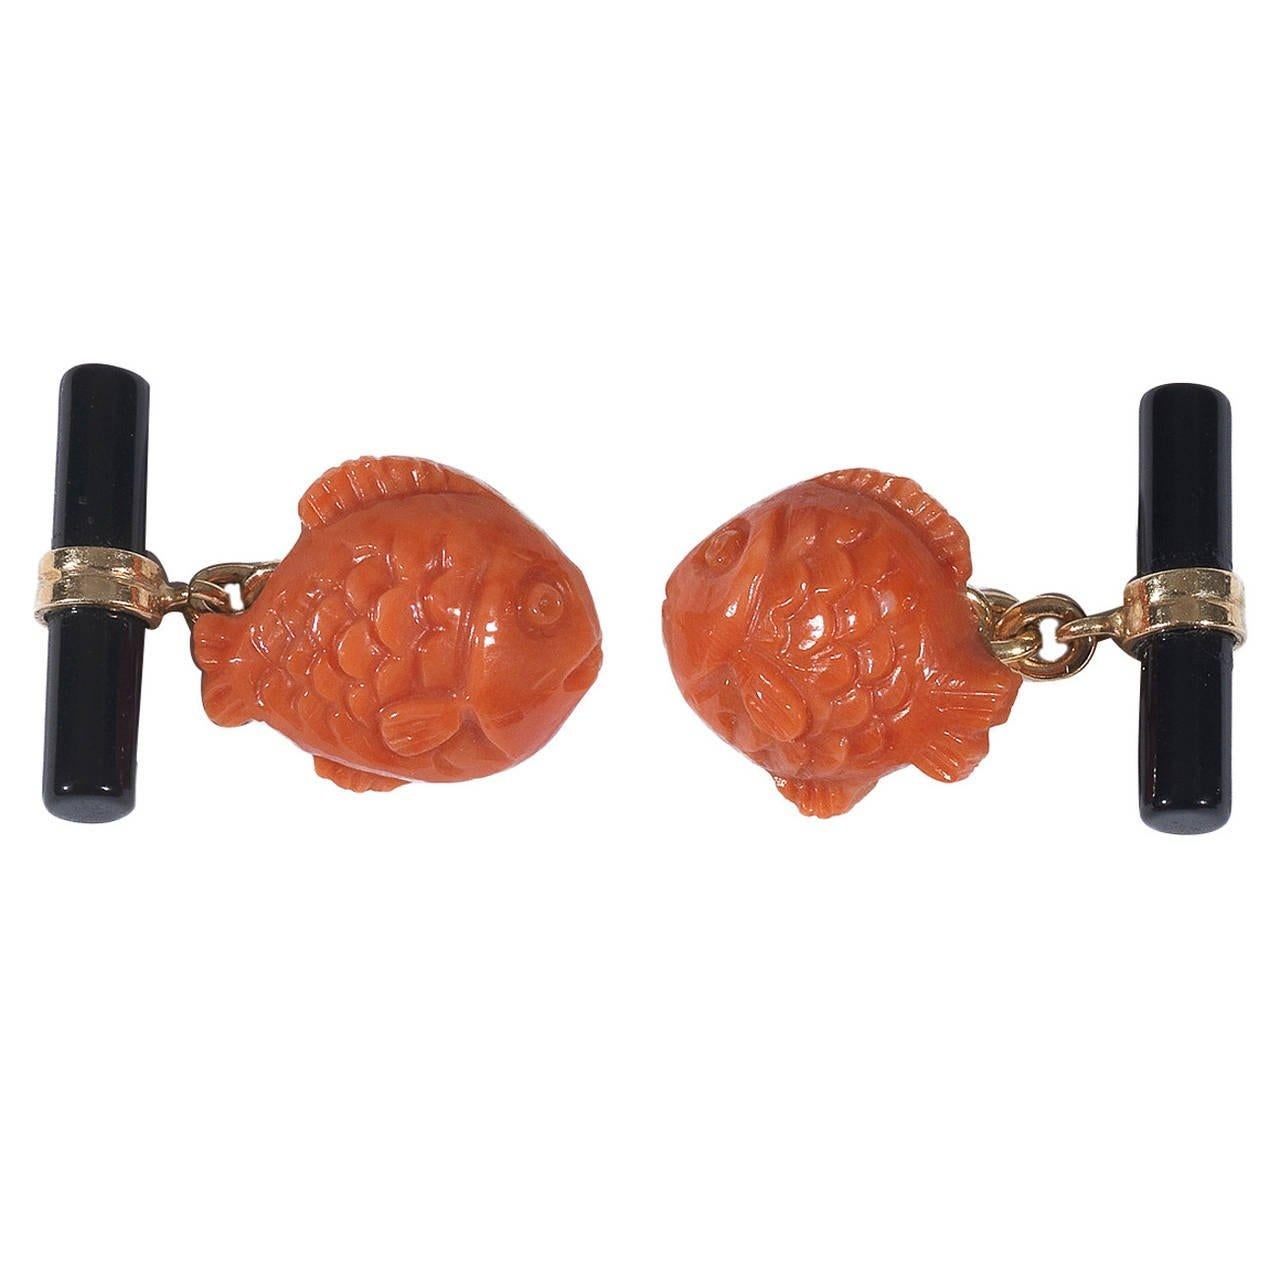 
Pair of cufflinks designed as carved coral fish.

Chain link connections with onyx baton.      

Mounted in 18Kt yellow gold